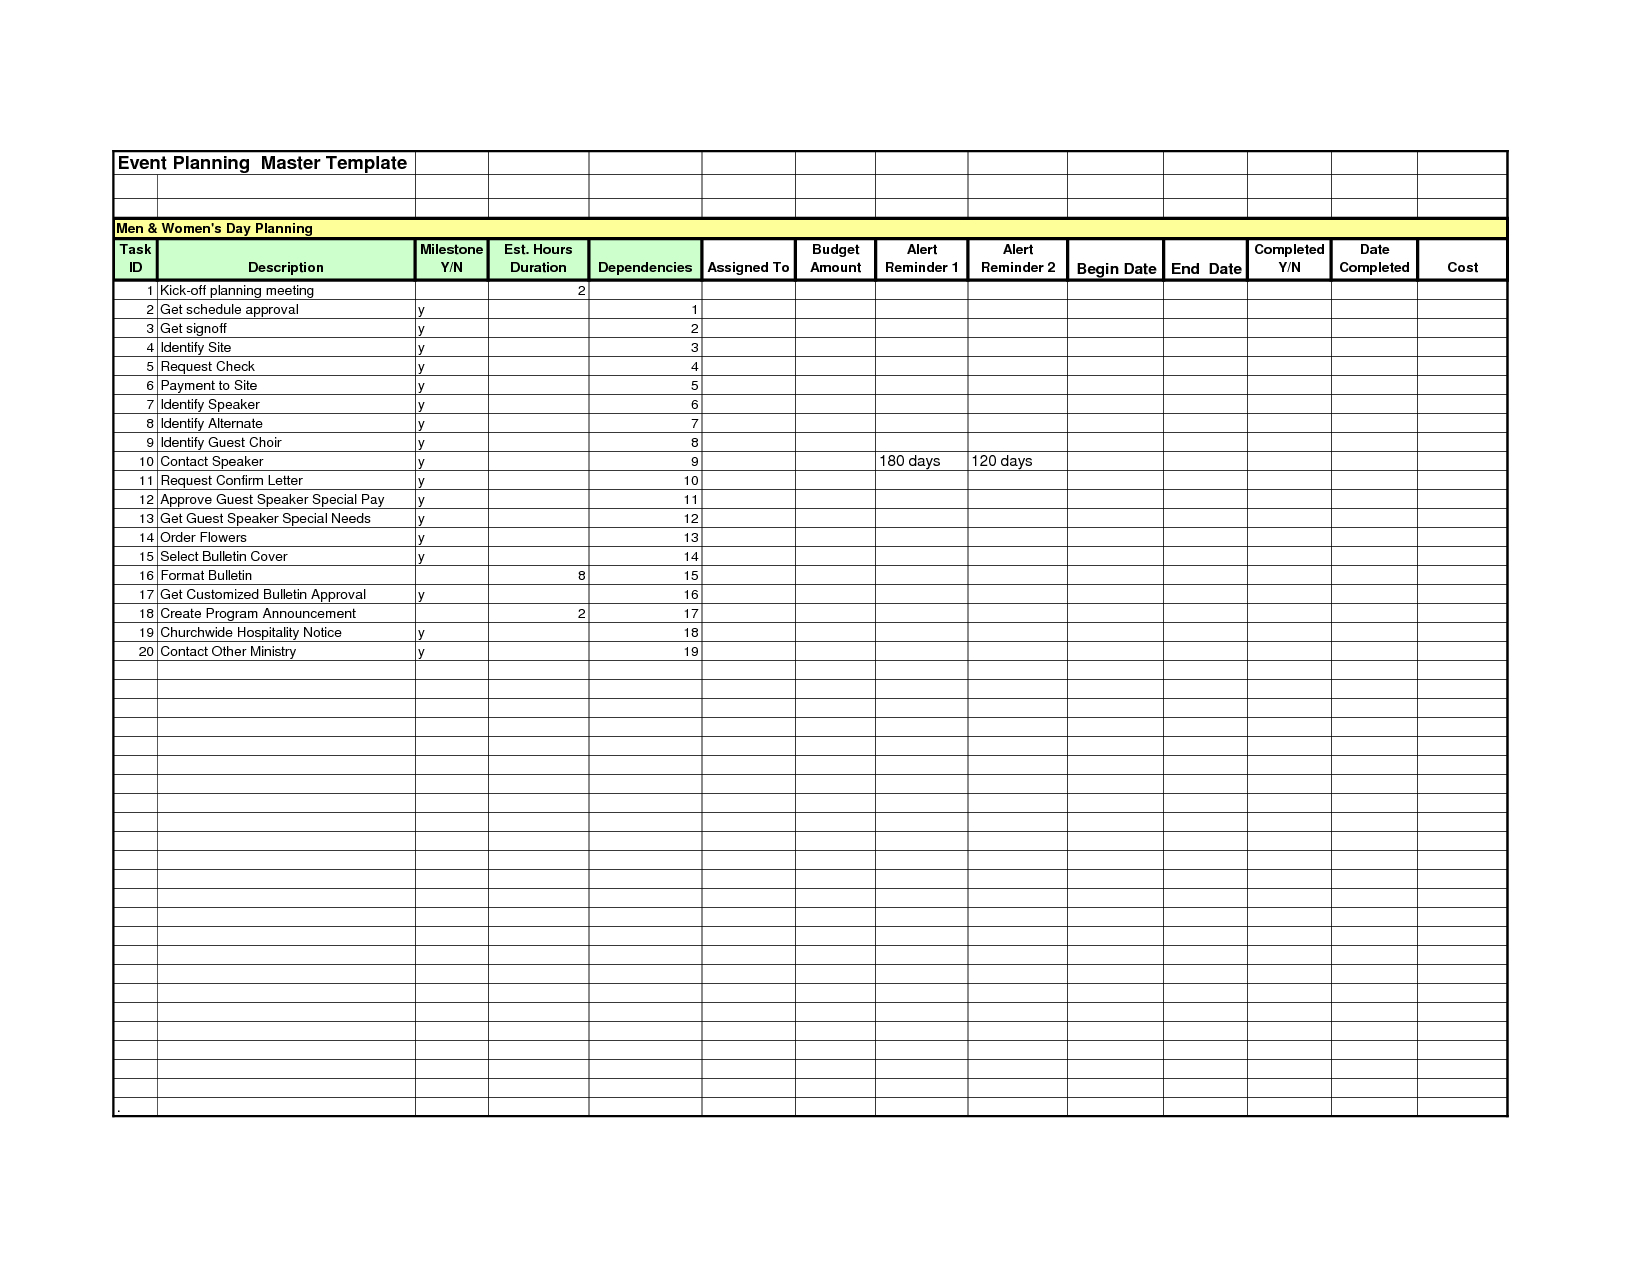 Event Planning Spreadsheet Excel Intended For Event Planning Spreadsheet Sheet Work Plan Examples With Tasks